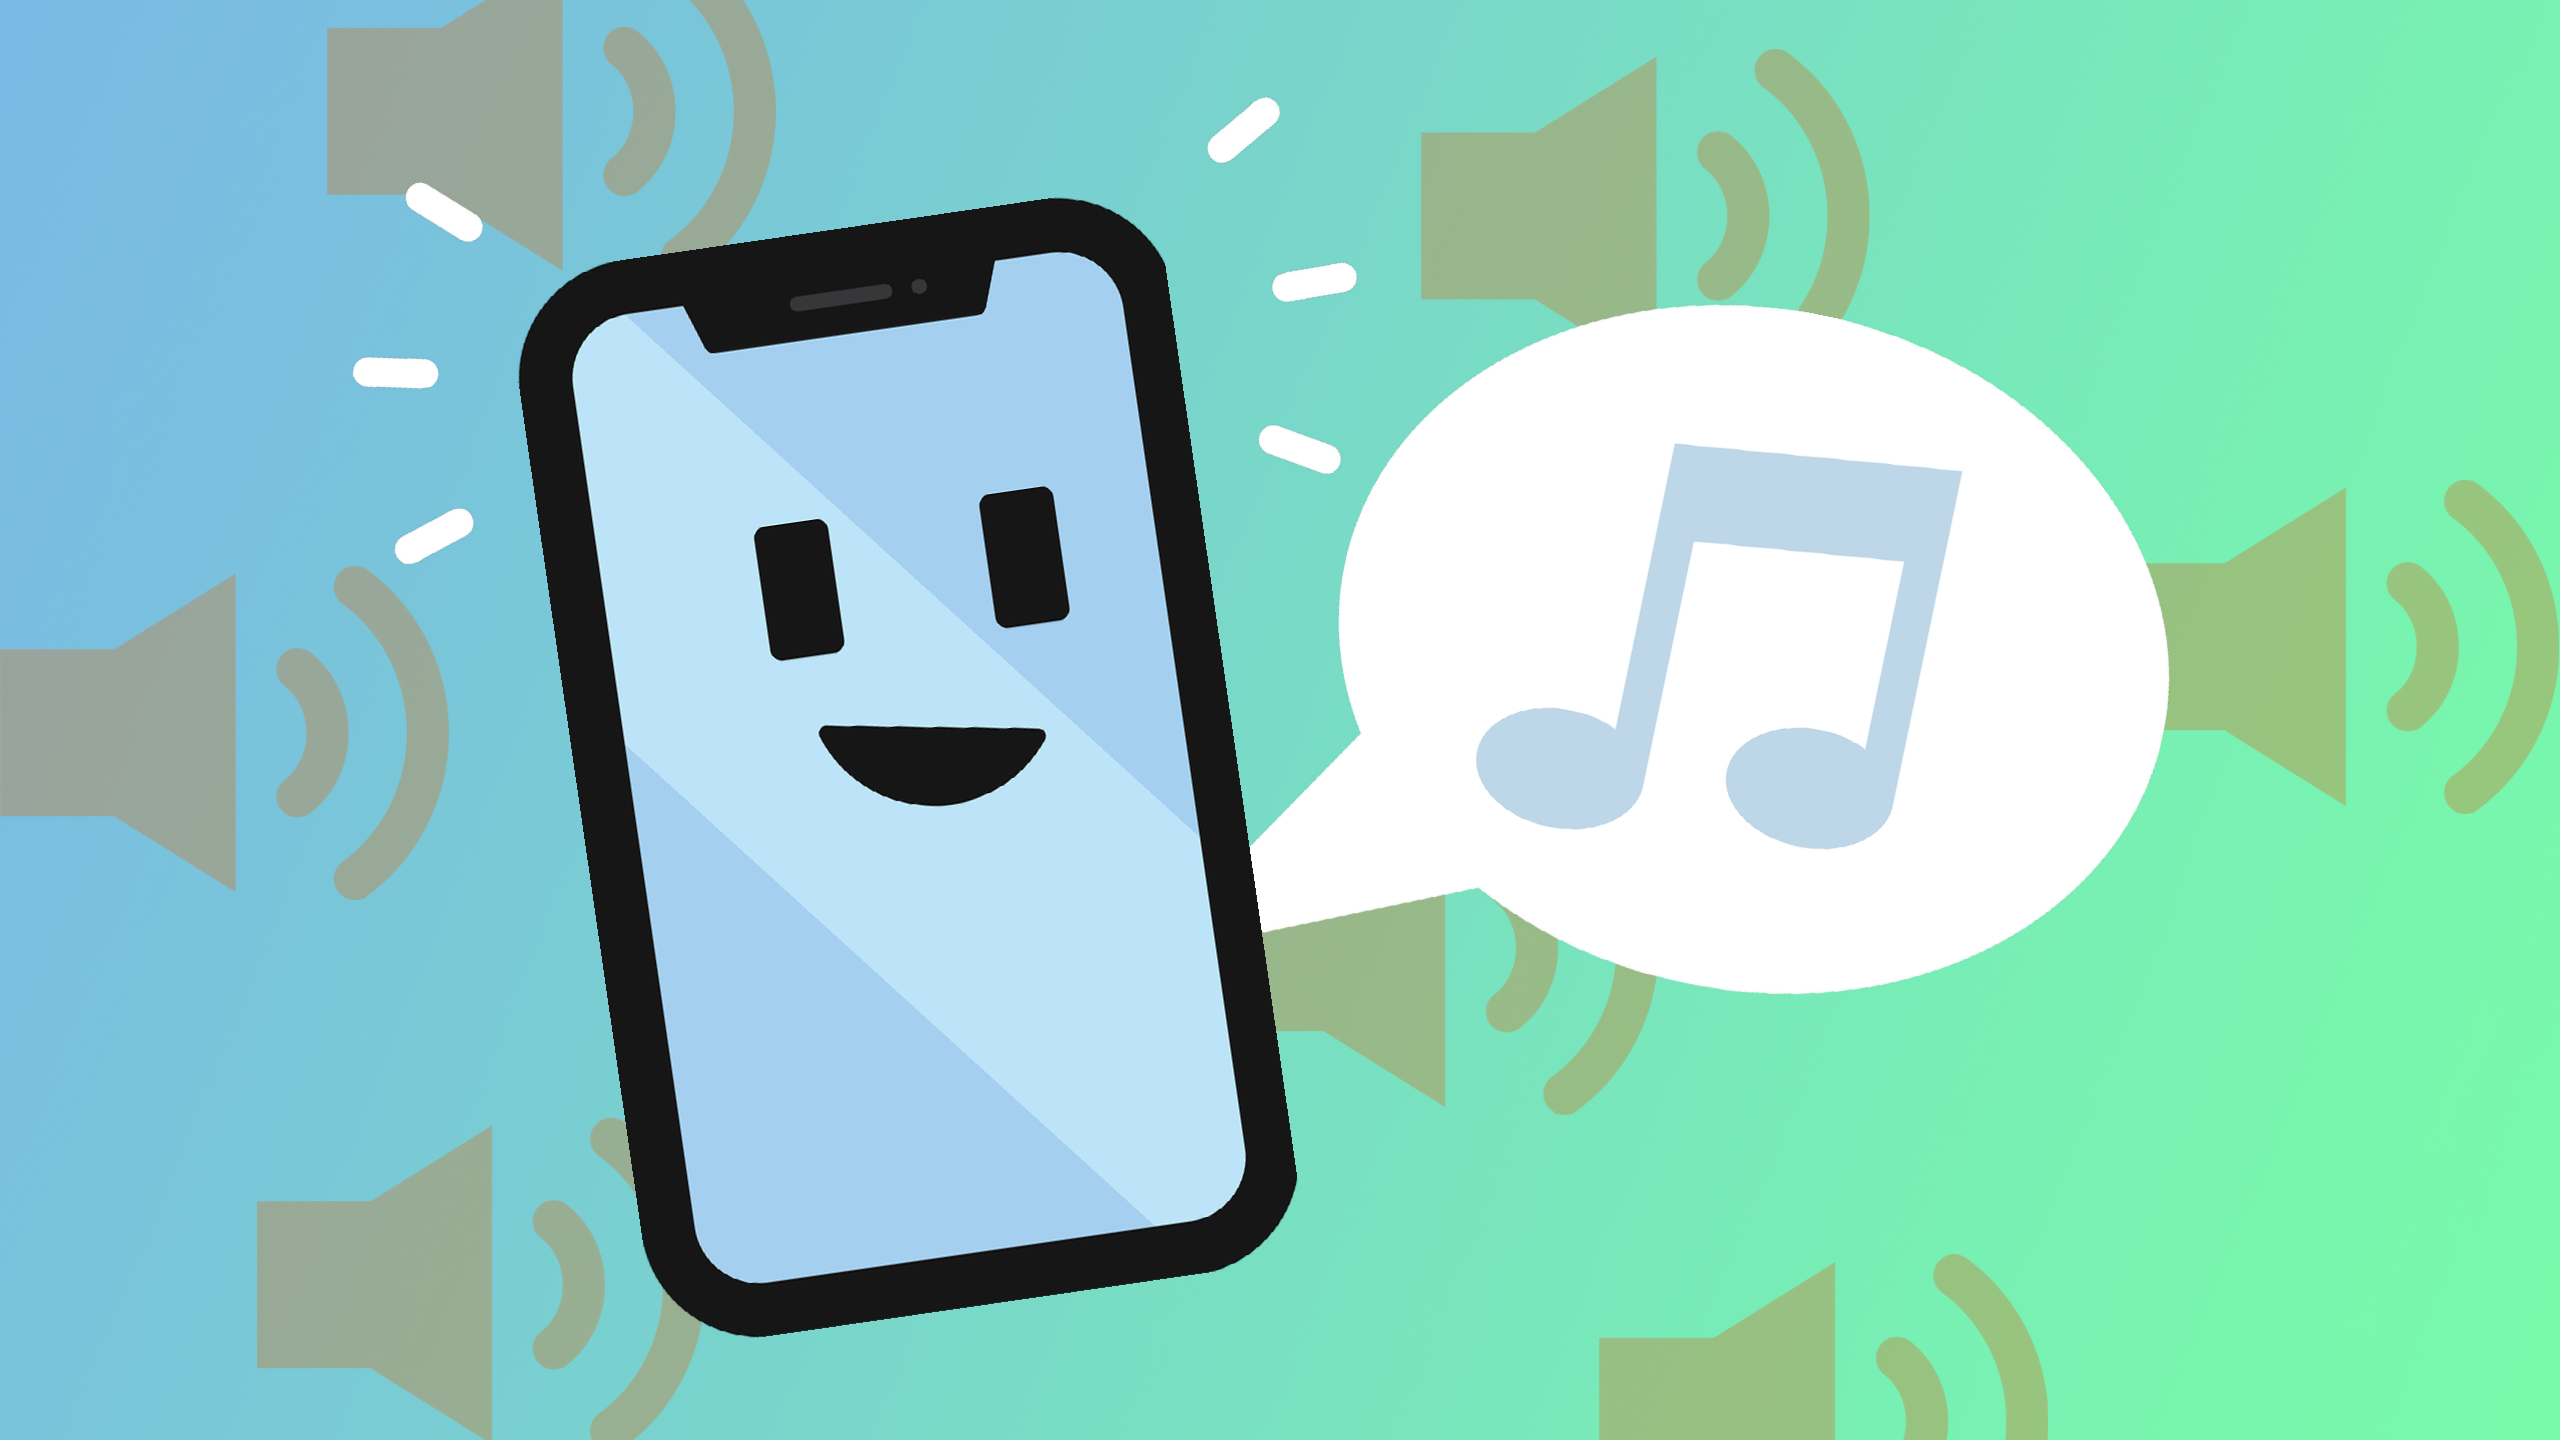 iOS 15: Play Background Sounds While Listening To Music On iPhone